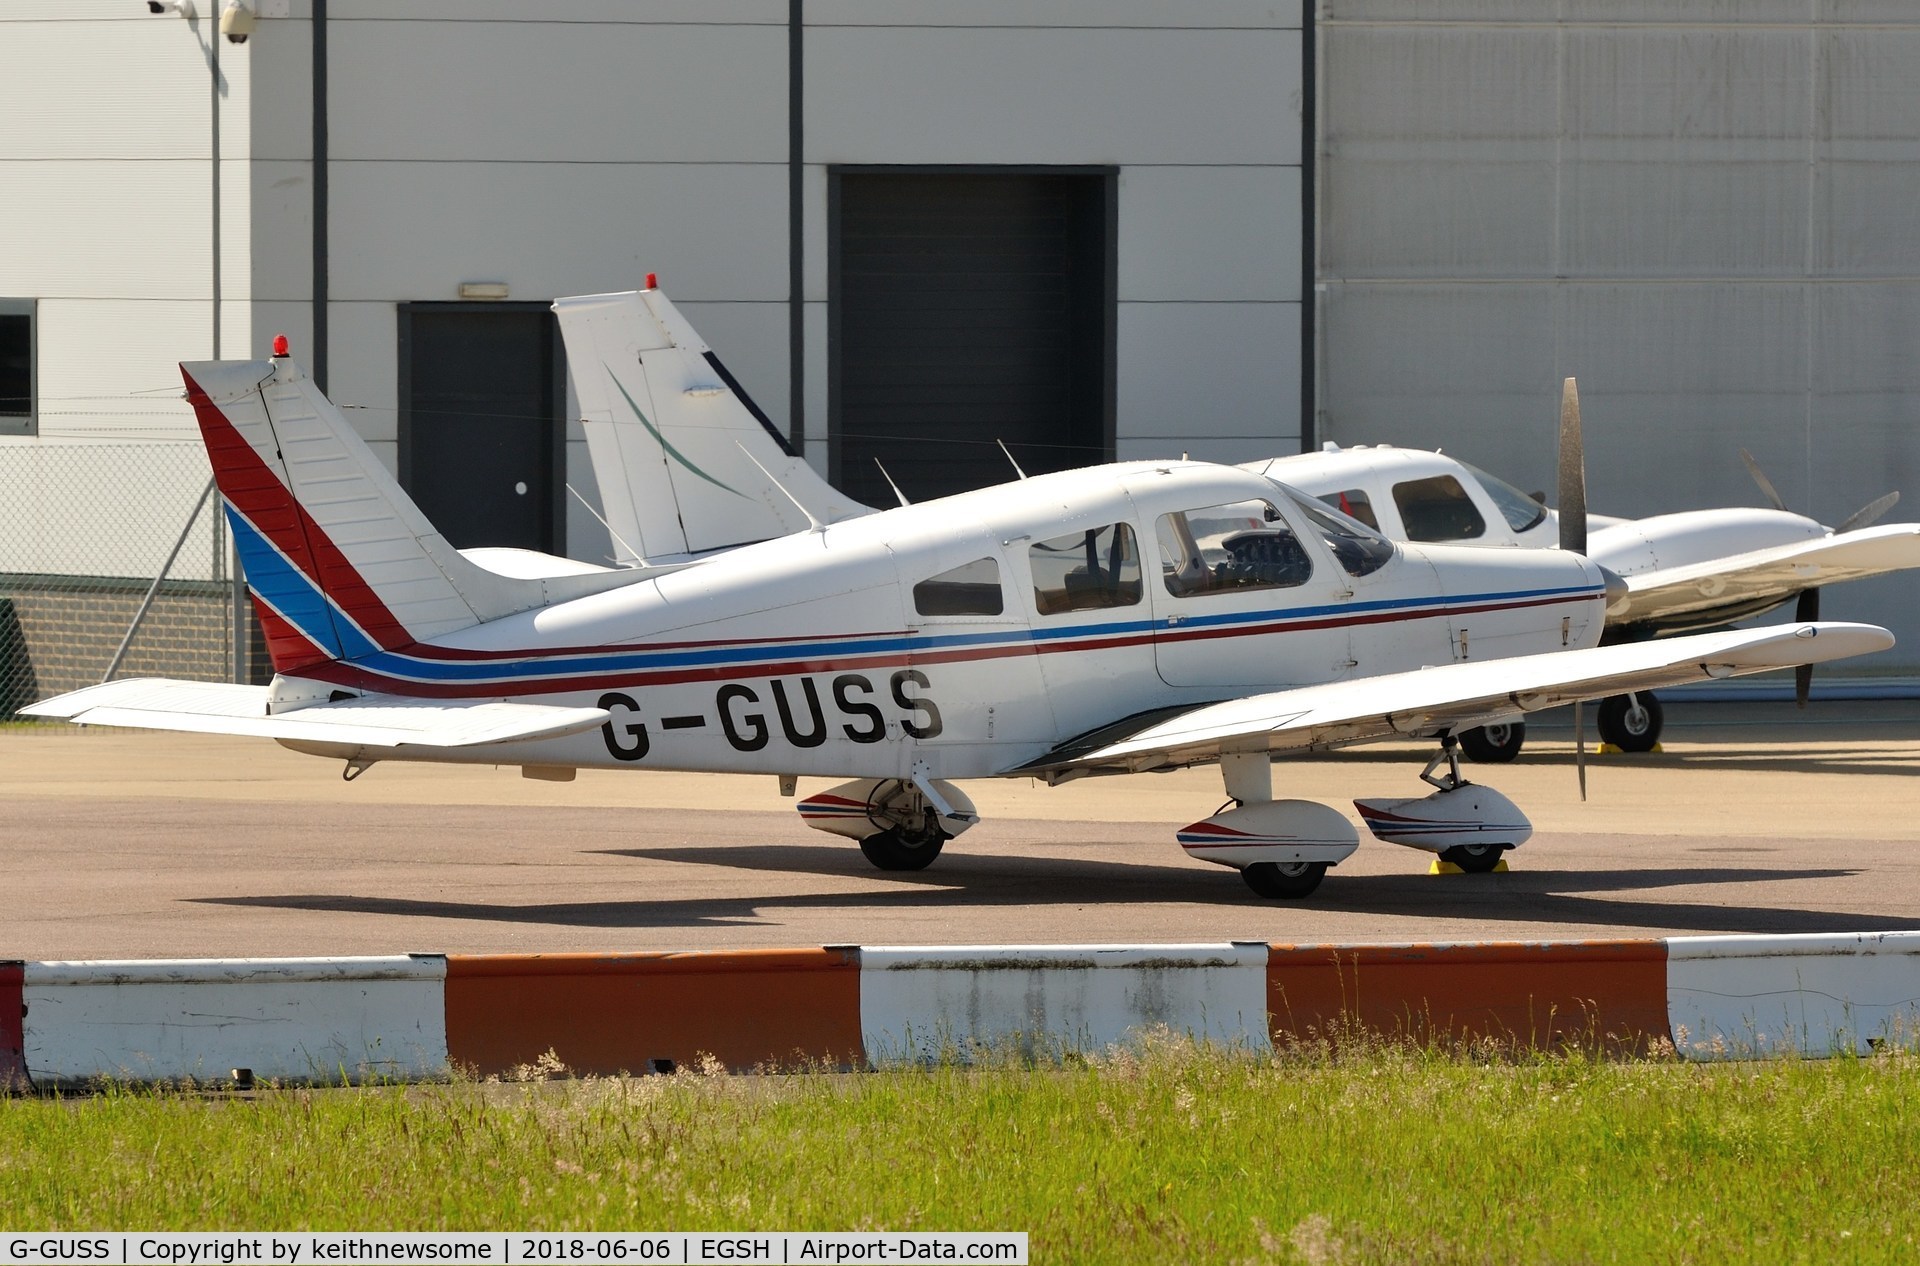 G-GUSS, 1974 Piper PA-28-151 Cherokee Warrior C/N 28-7415497, Local Visitor.